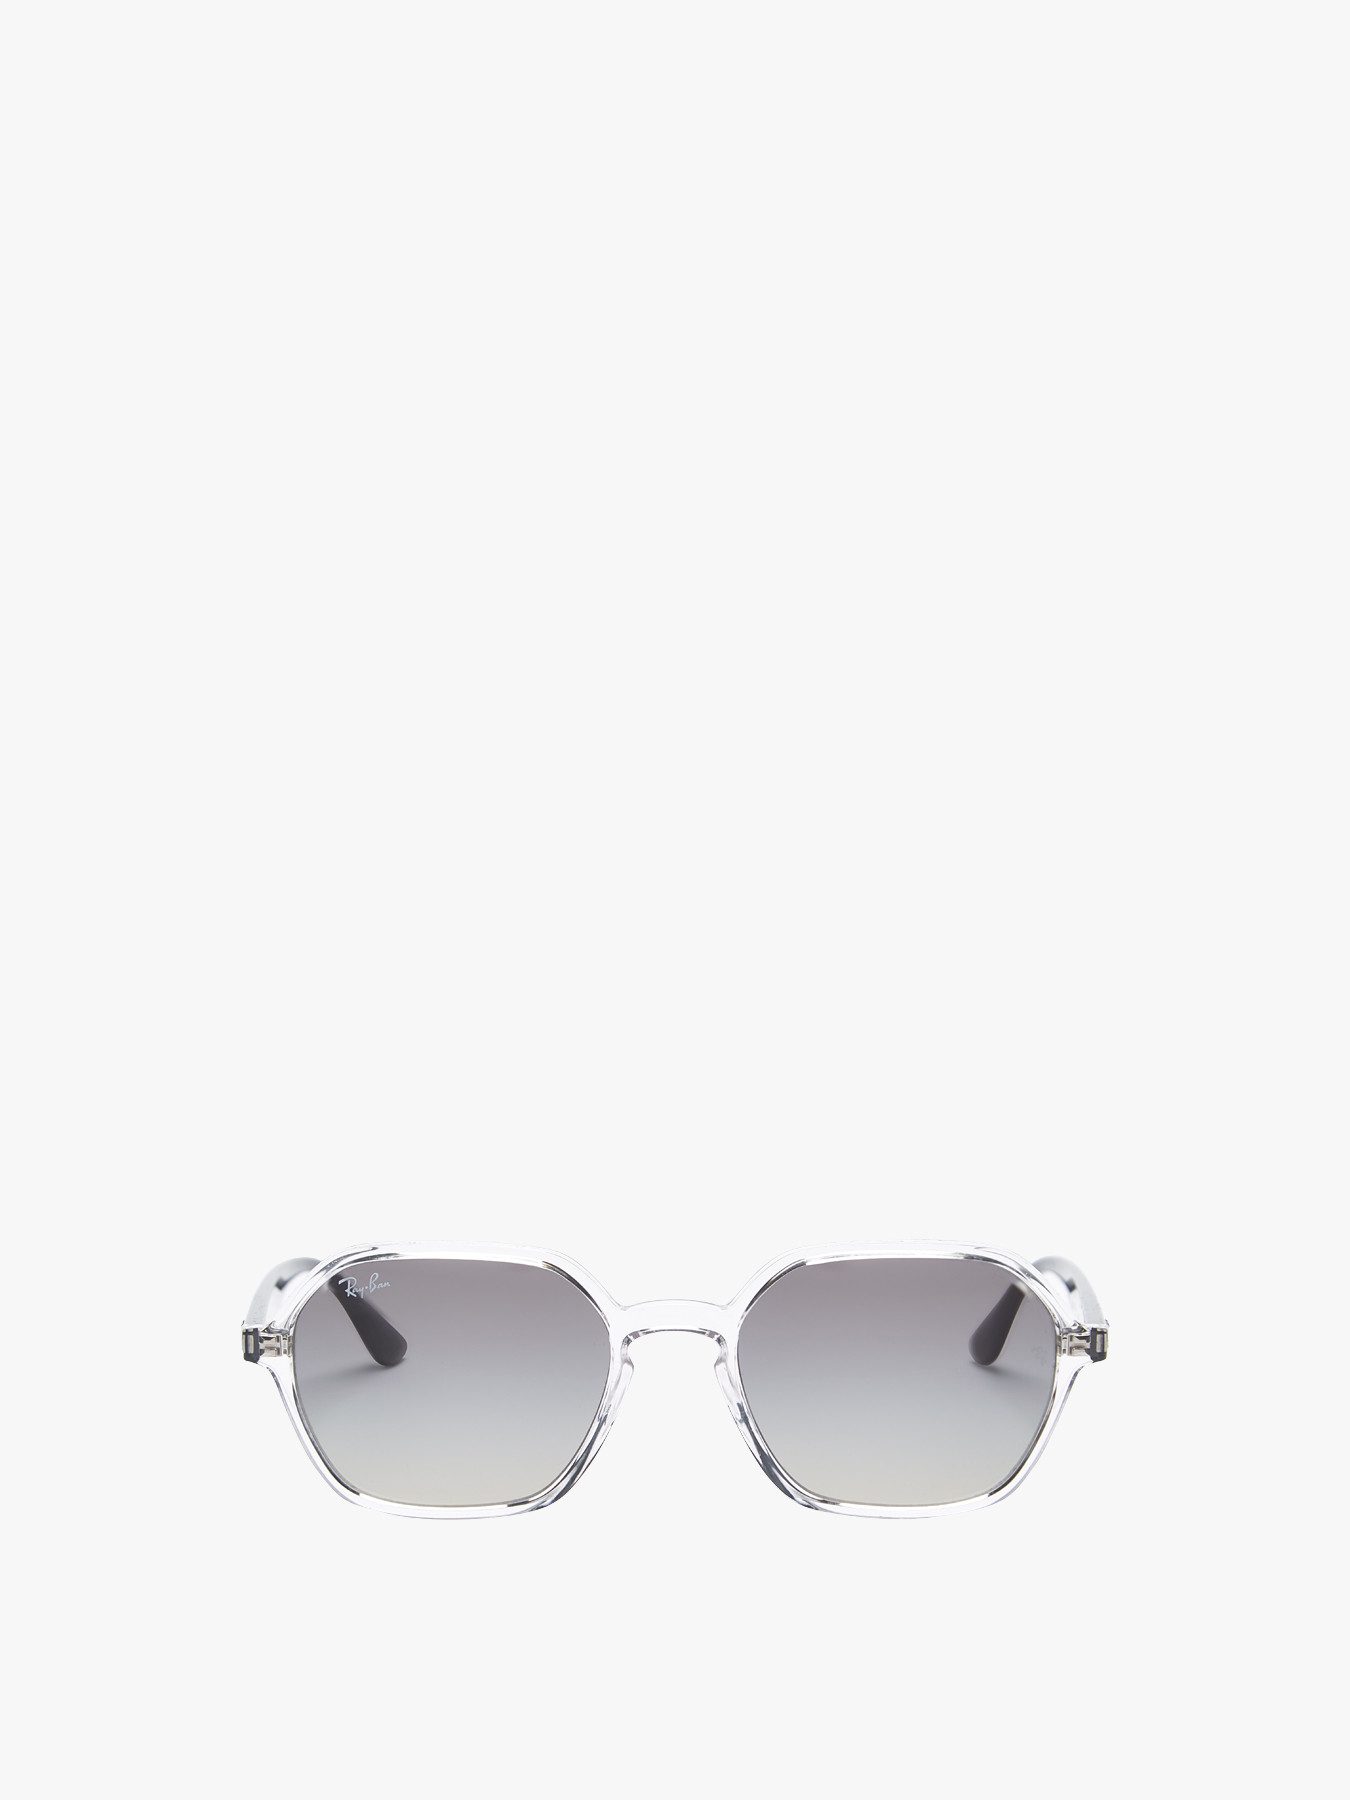 Ray Ban Square Injected Sunglasses Transparent Havana